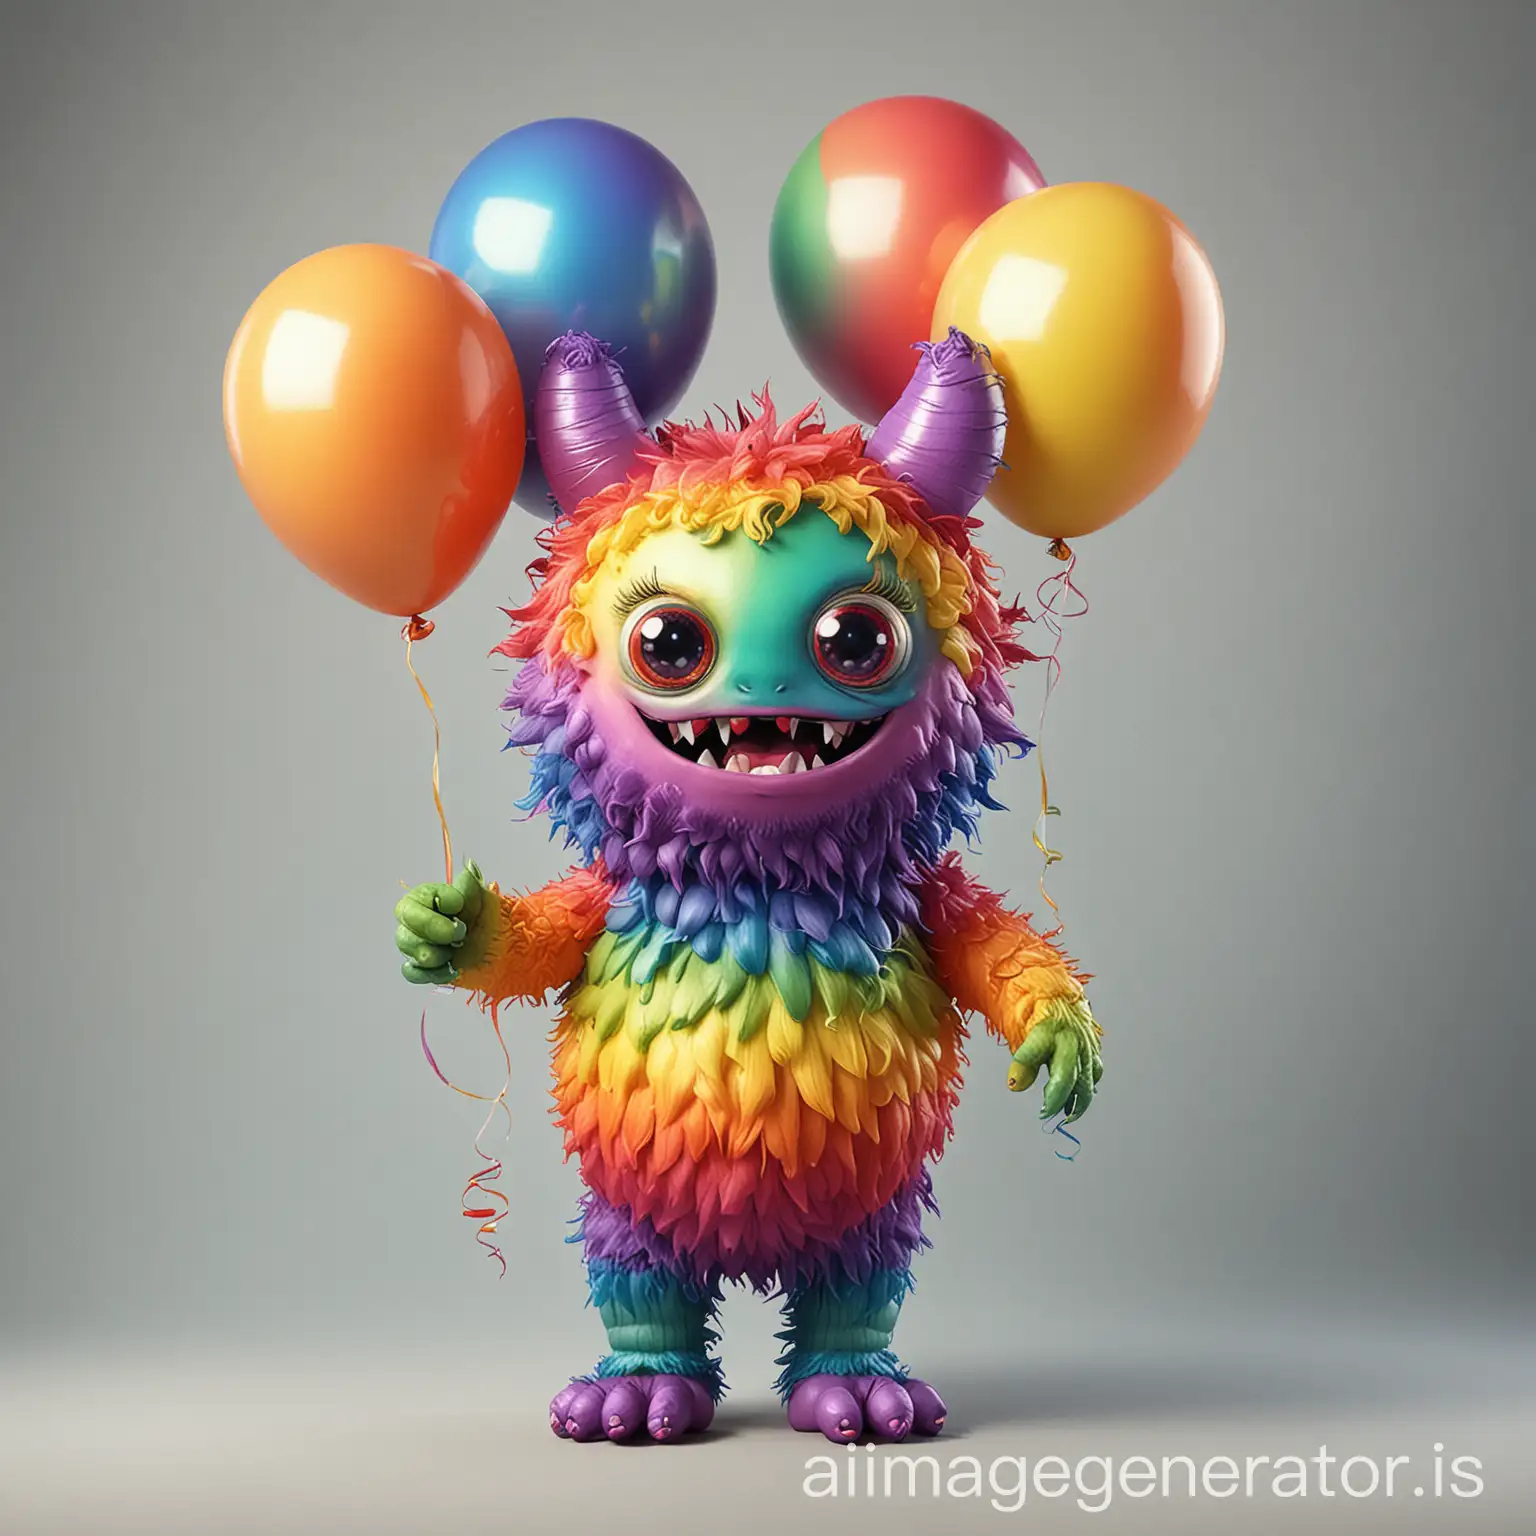 cute rainbow colored monster holding balloons